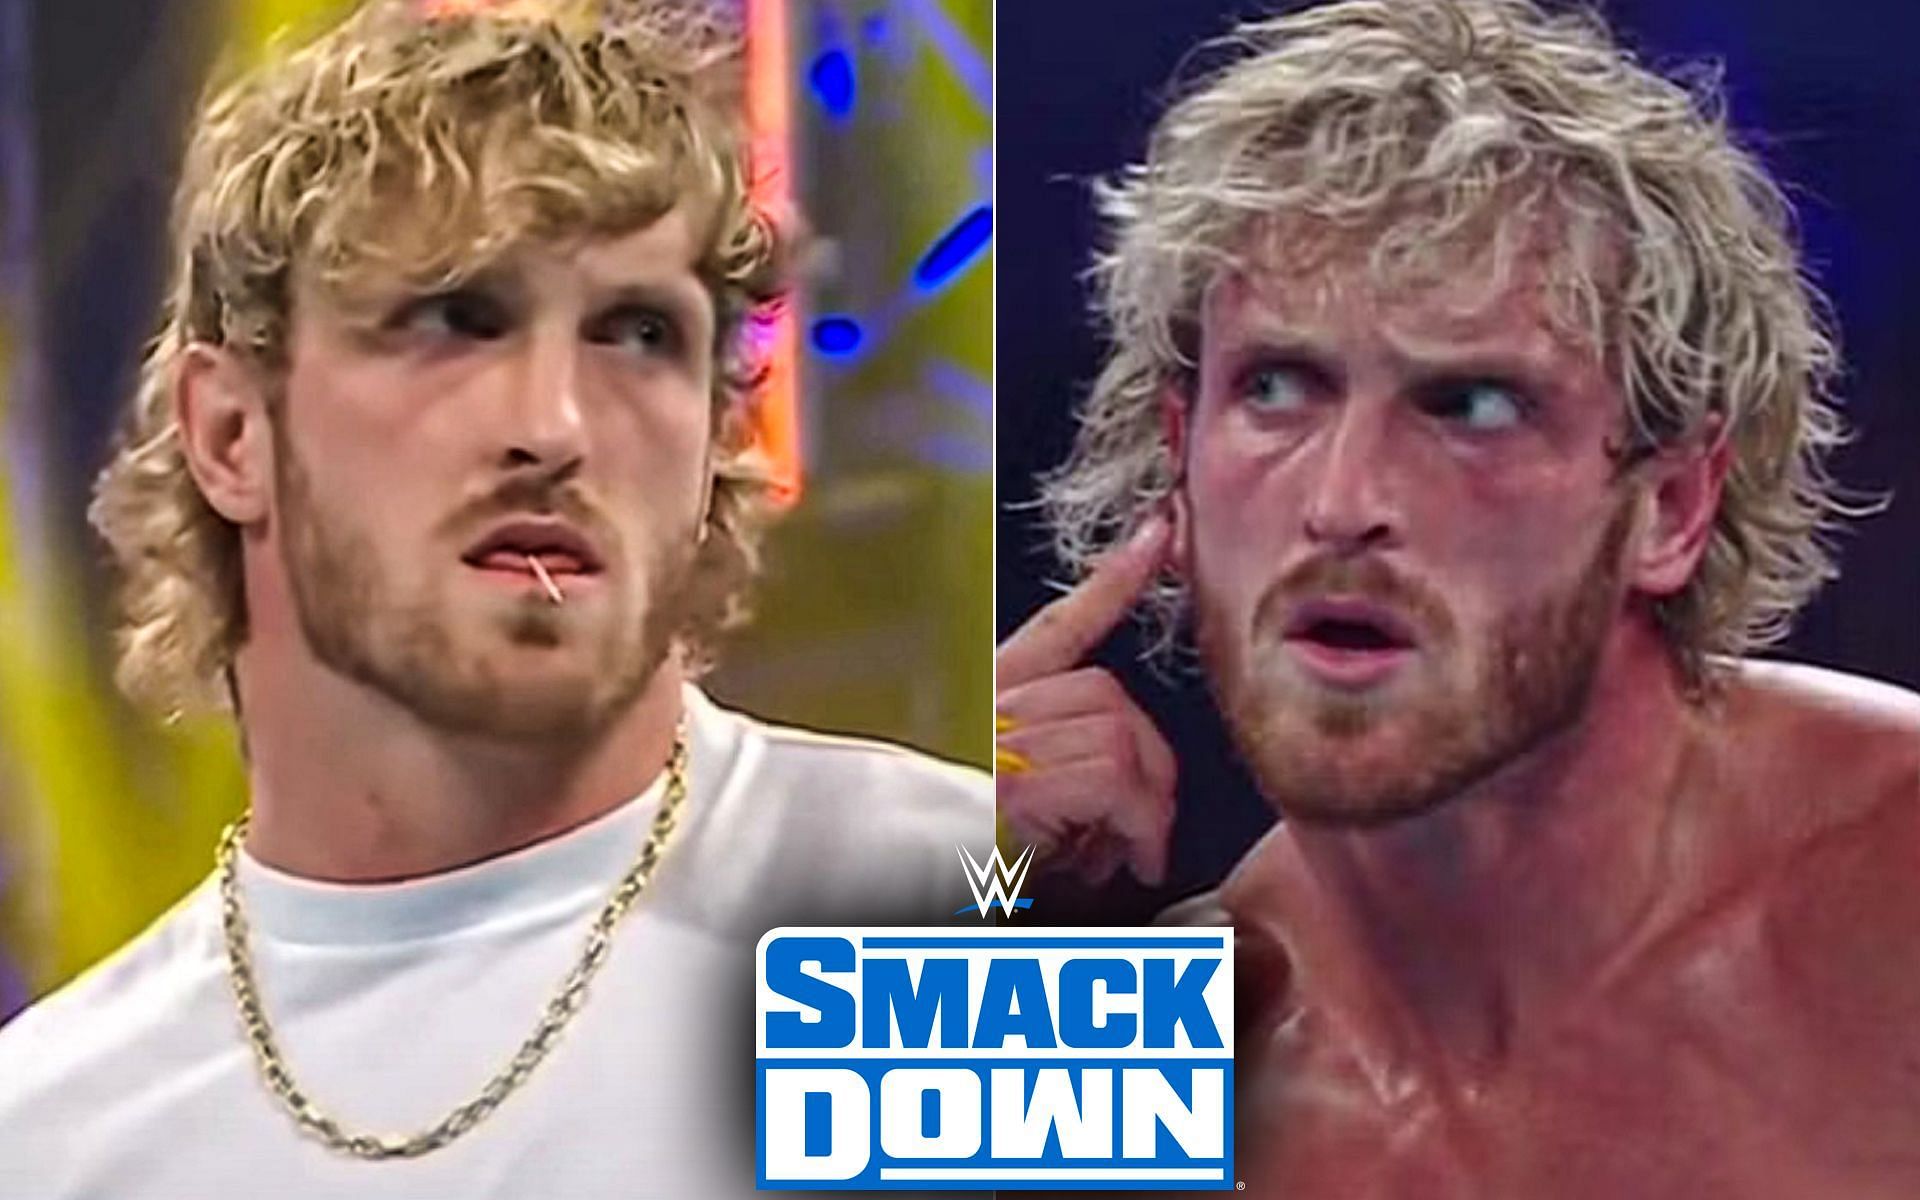 Logan Paul is set to make his comeback on upcoming edition of SmackDown